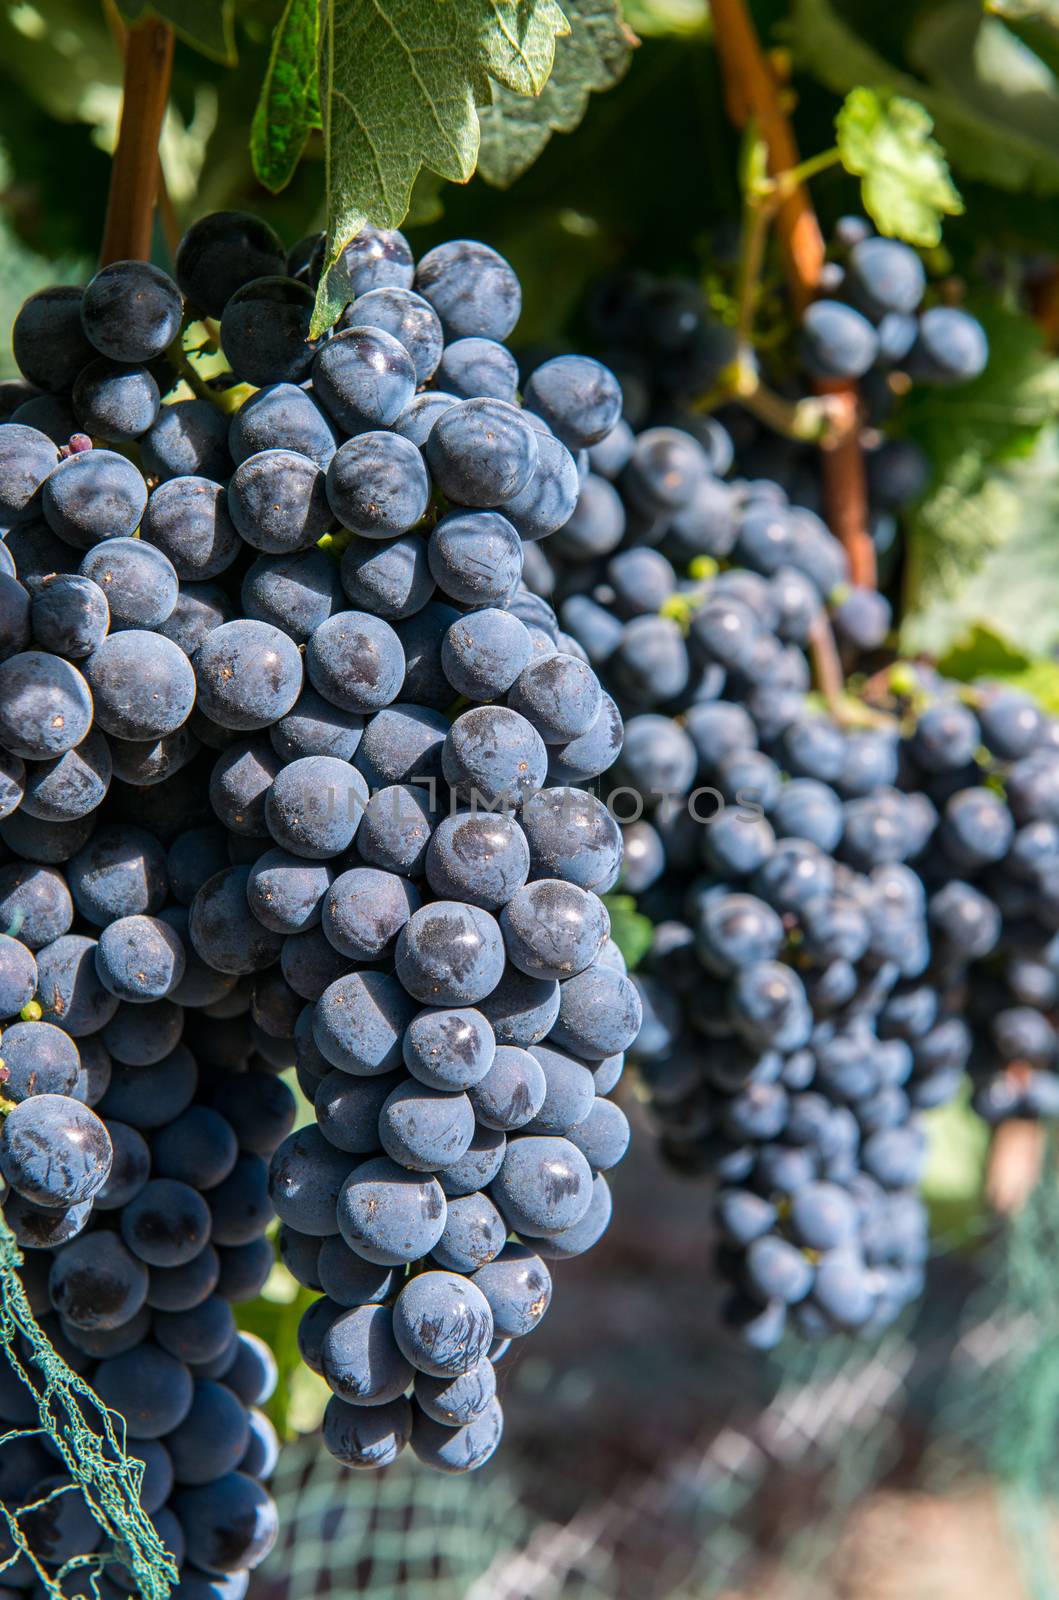 Bunches of purple grapes on the vine in Solvang, California by Njean